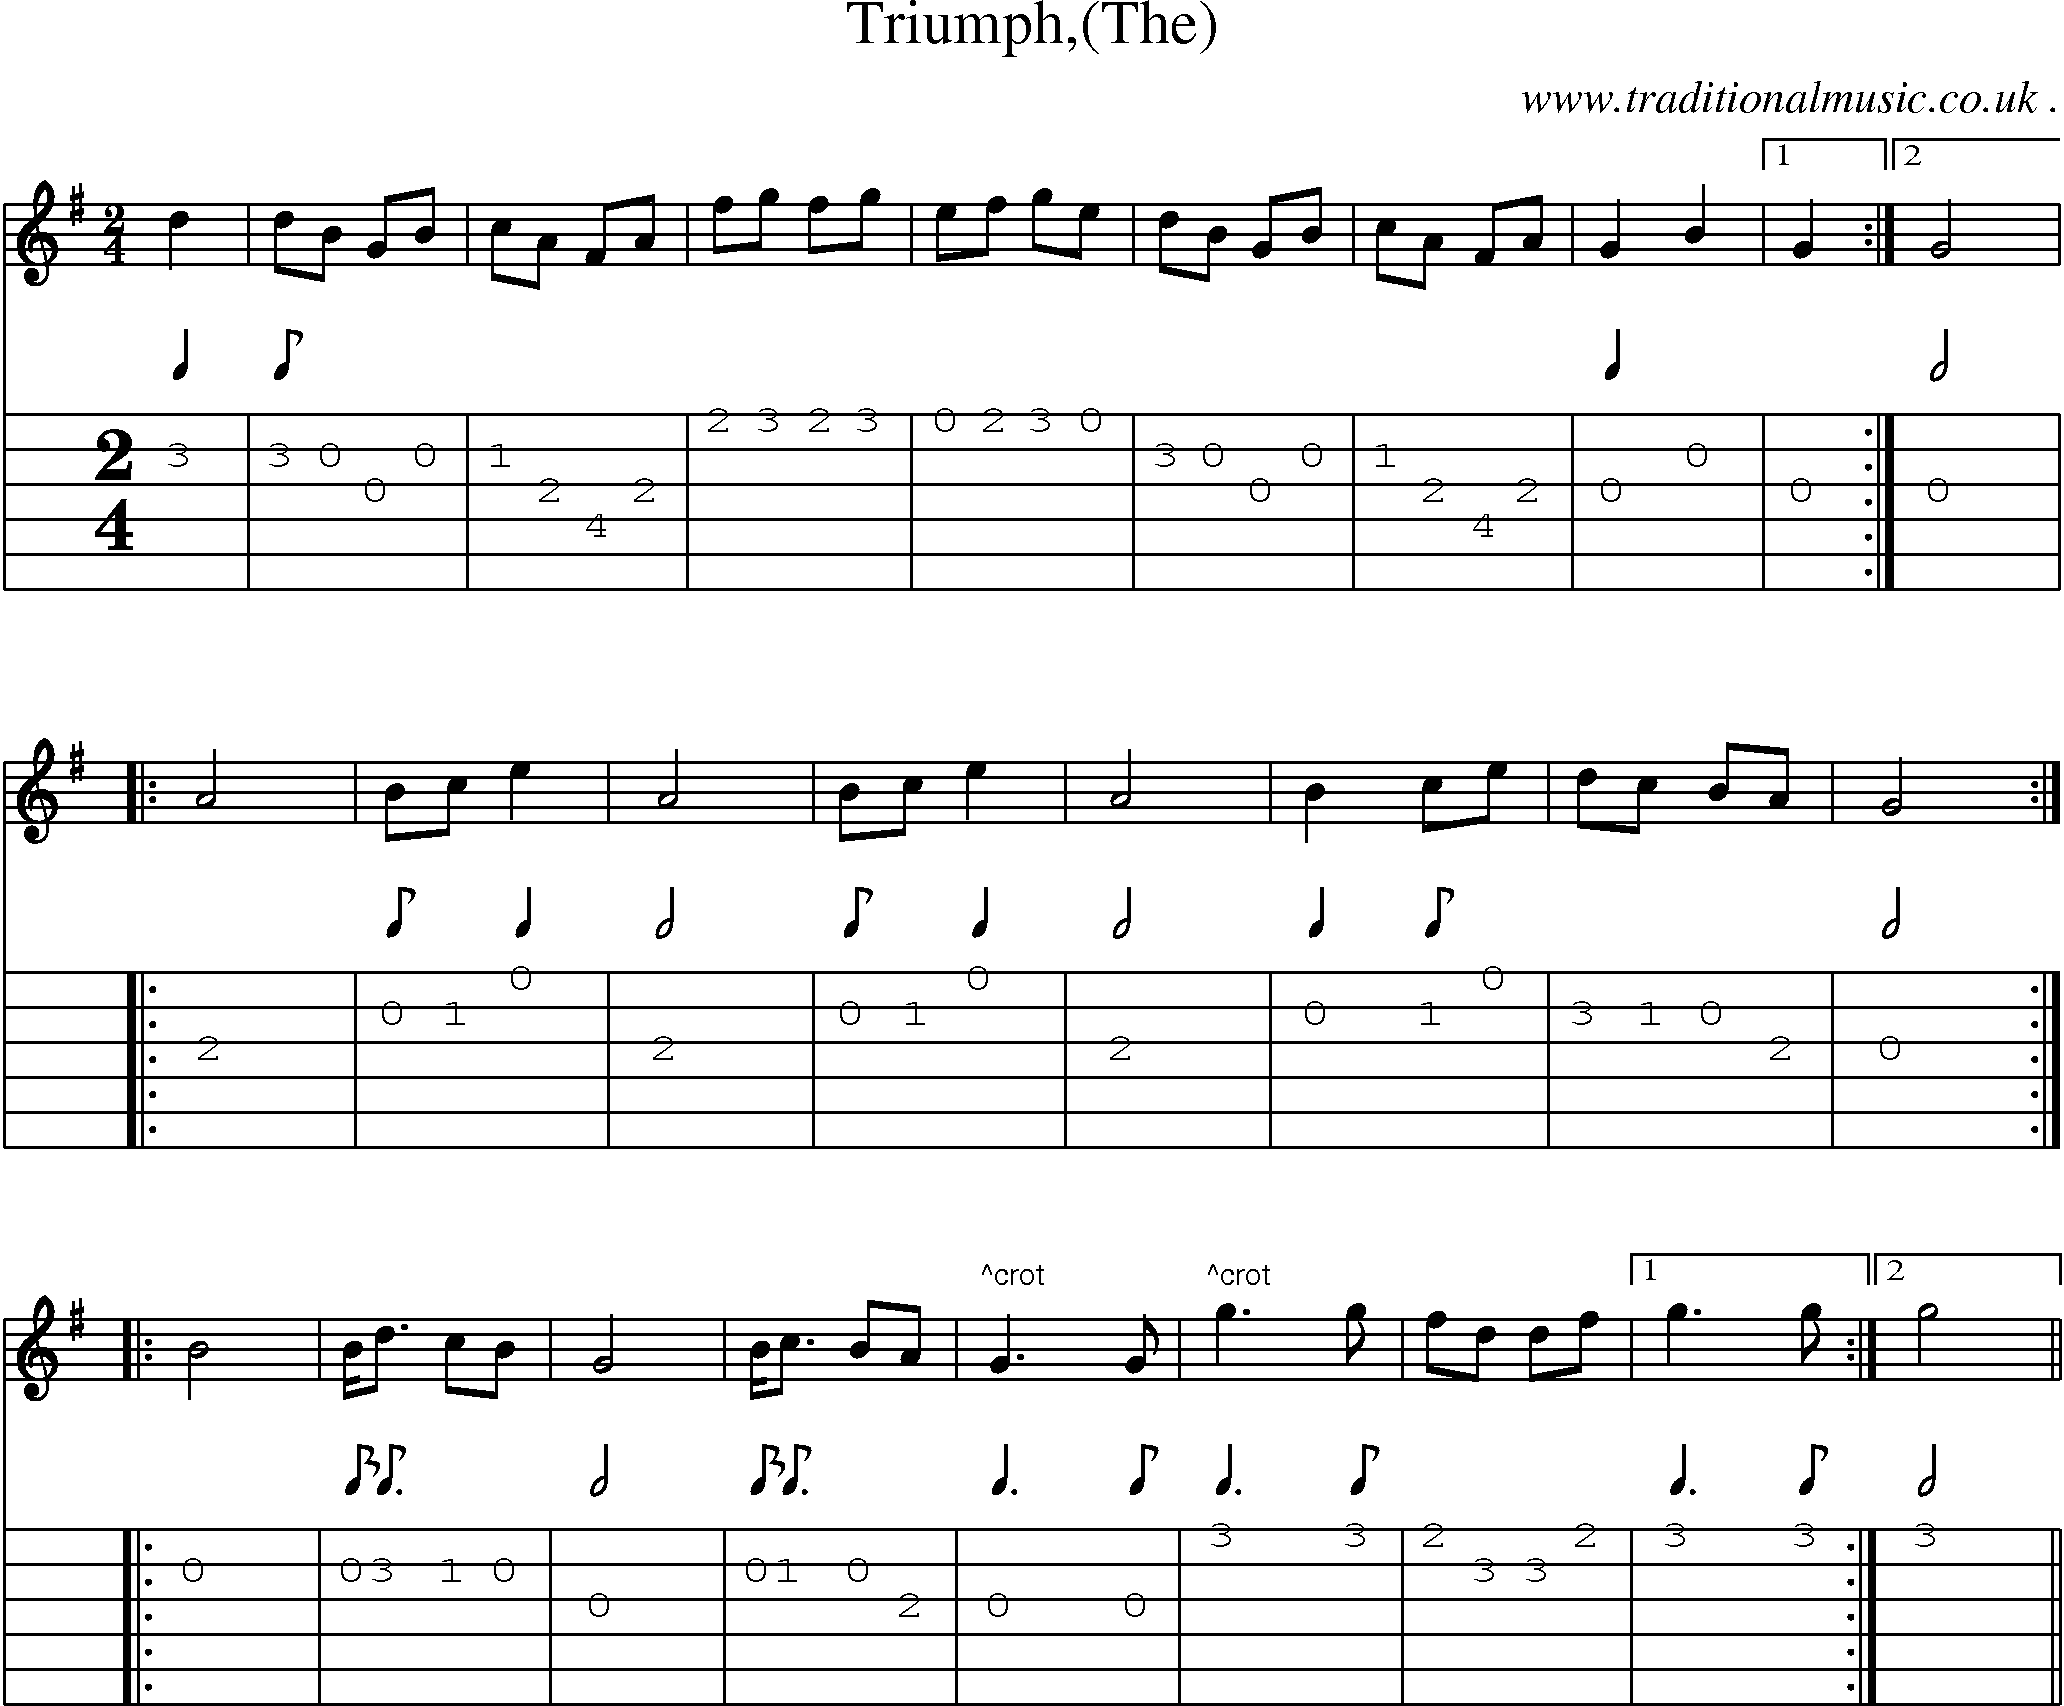 Sheet-Music and Guitar Tabs for Triumph(the)